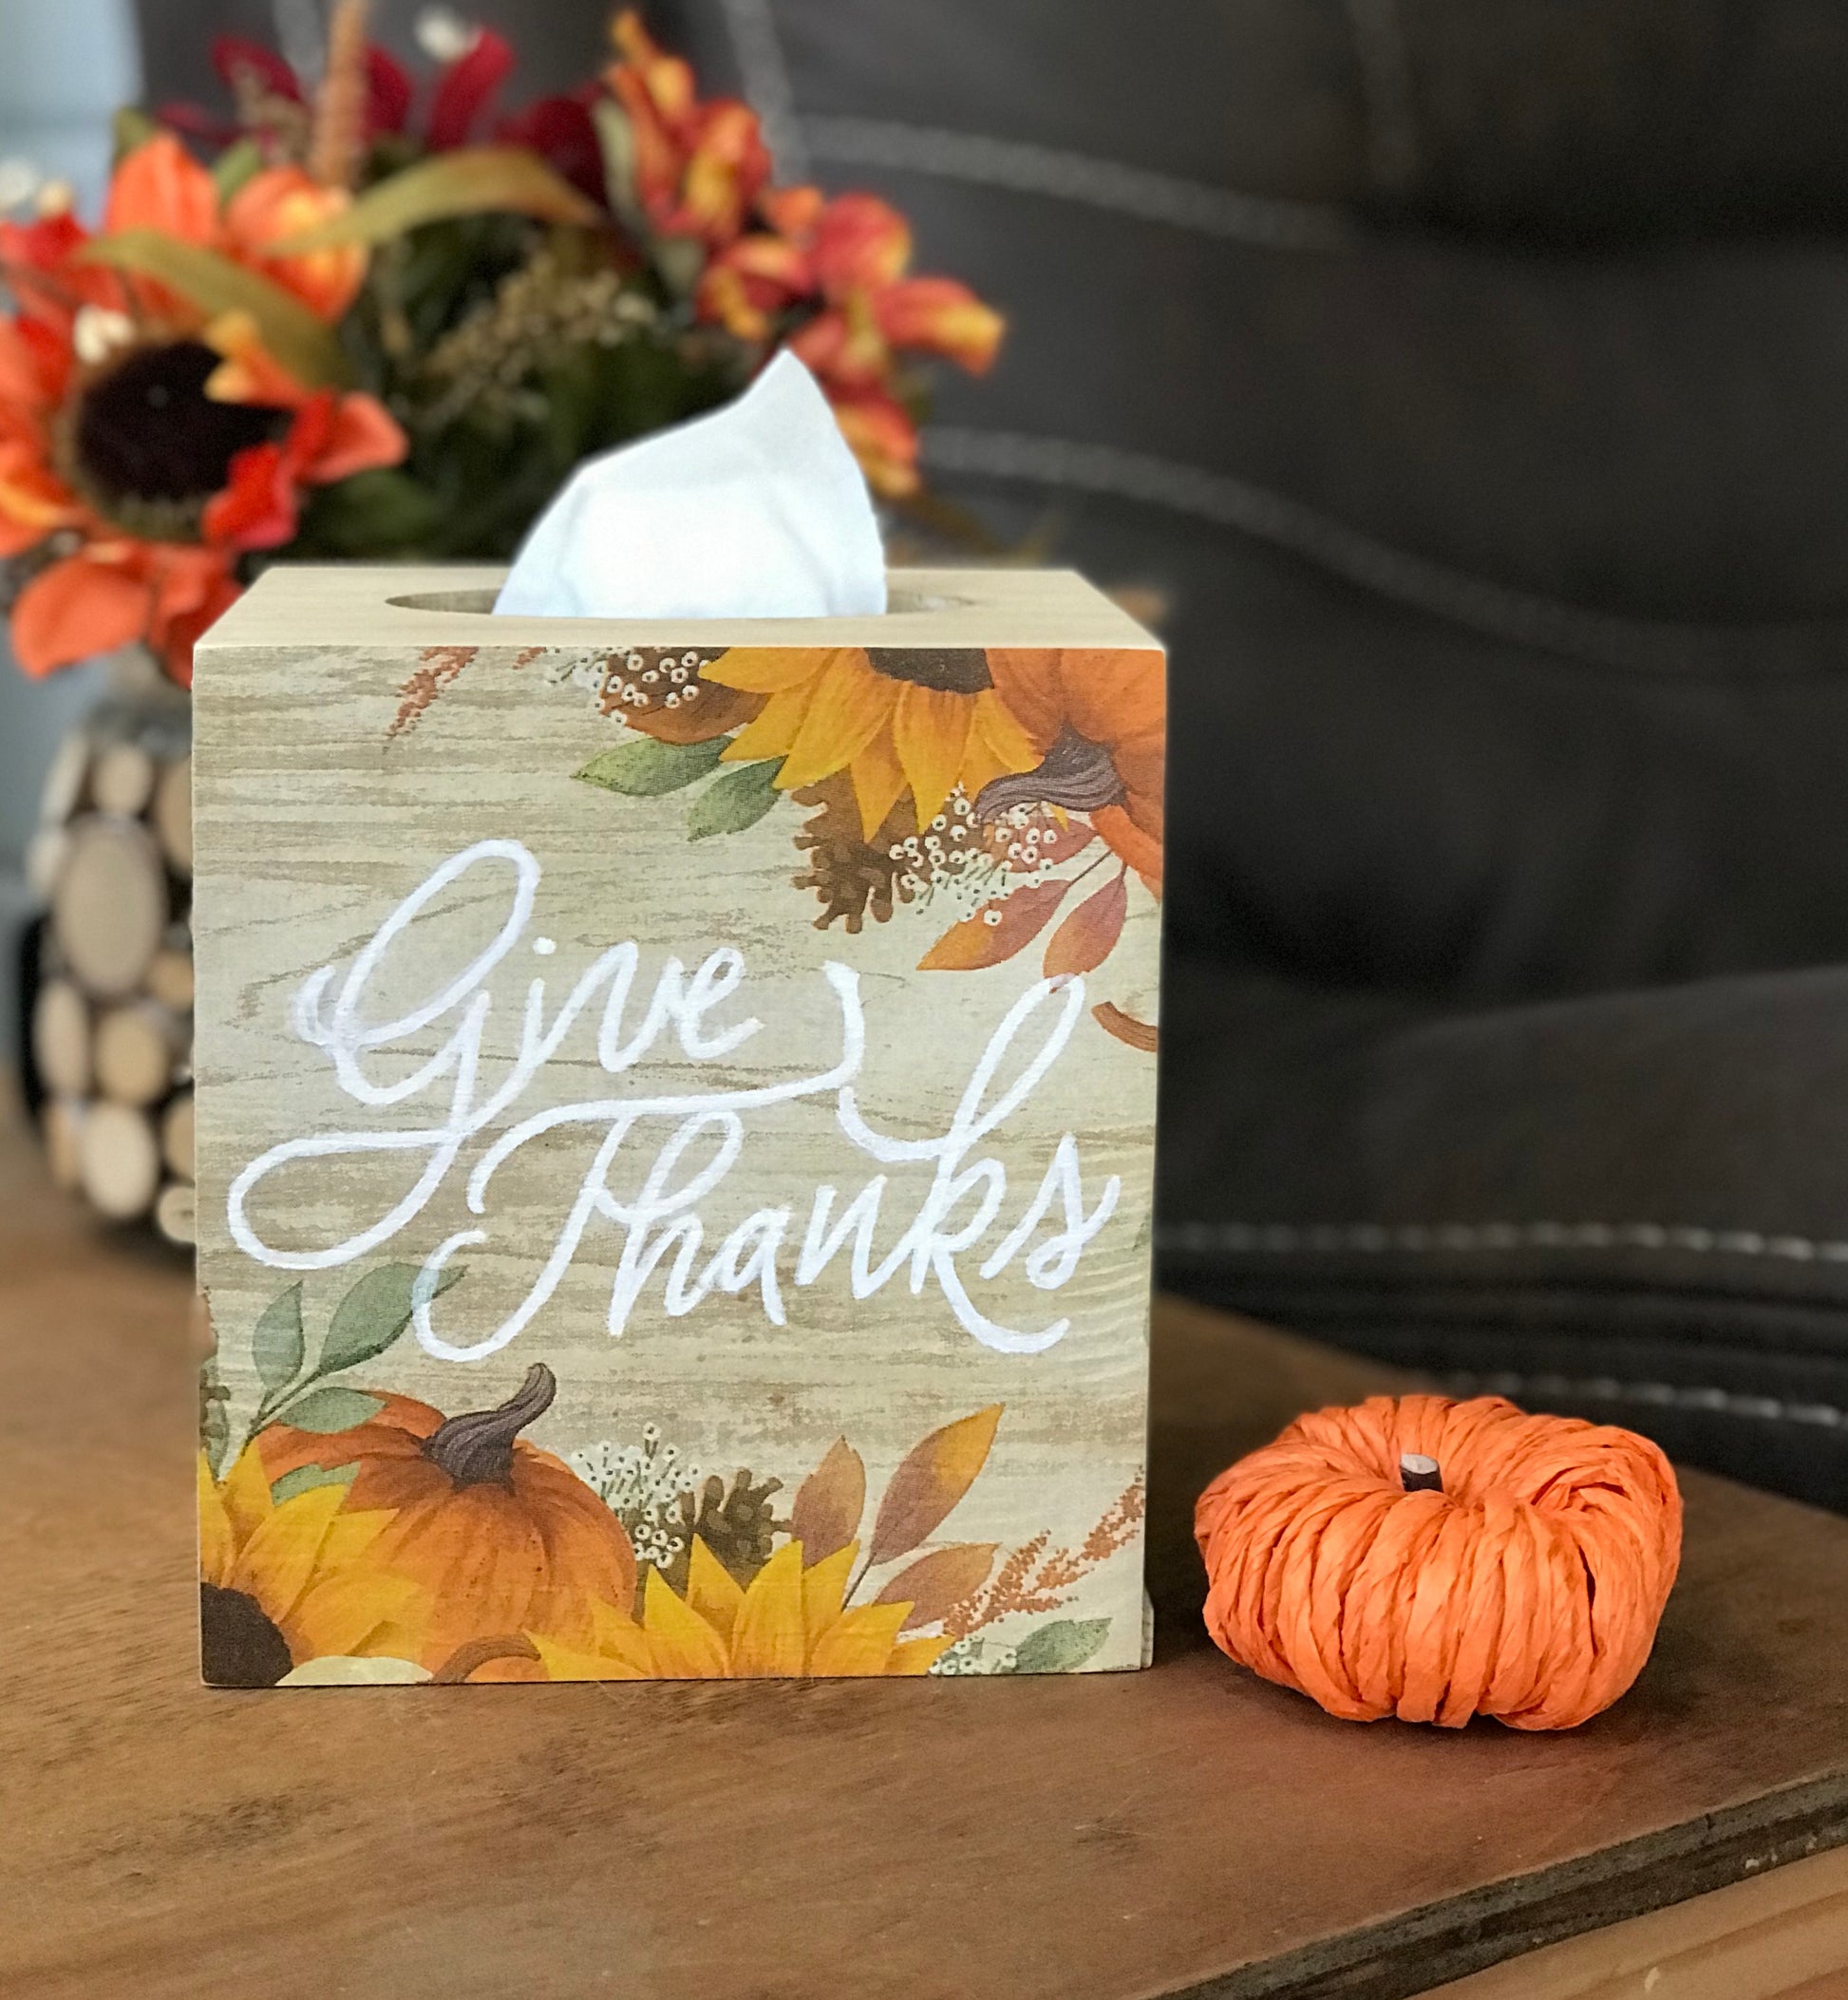 Crafted from wood Measures 5.75 inch x 5.25 inch Fits any standard size facial tissue box (not included). Pumpkin and sunflower graphic with the saying "Give Thanks" is on one side. Other 3 sides are painted in cream with some brown tones.  Slide bottom cover. 